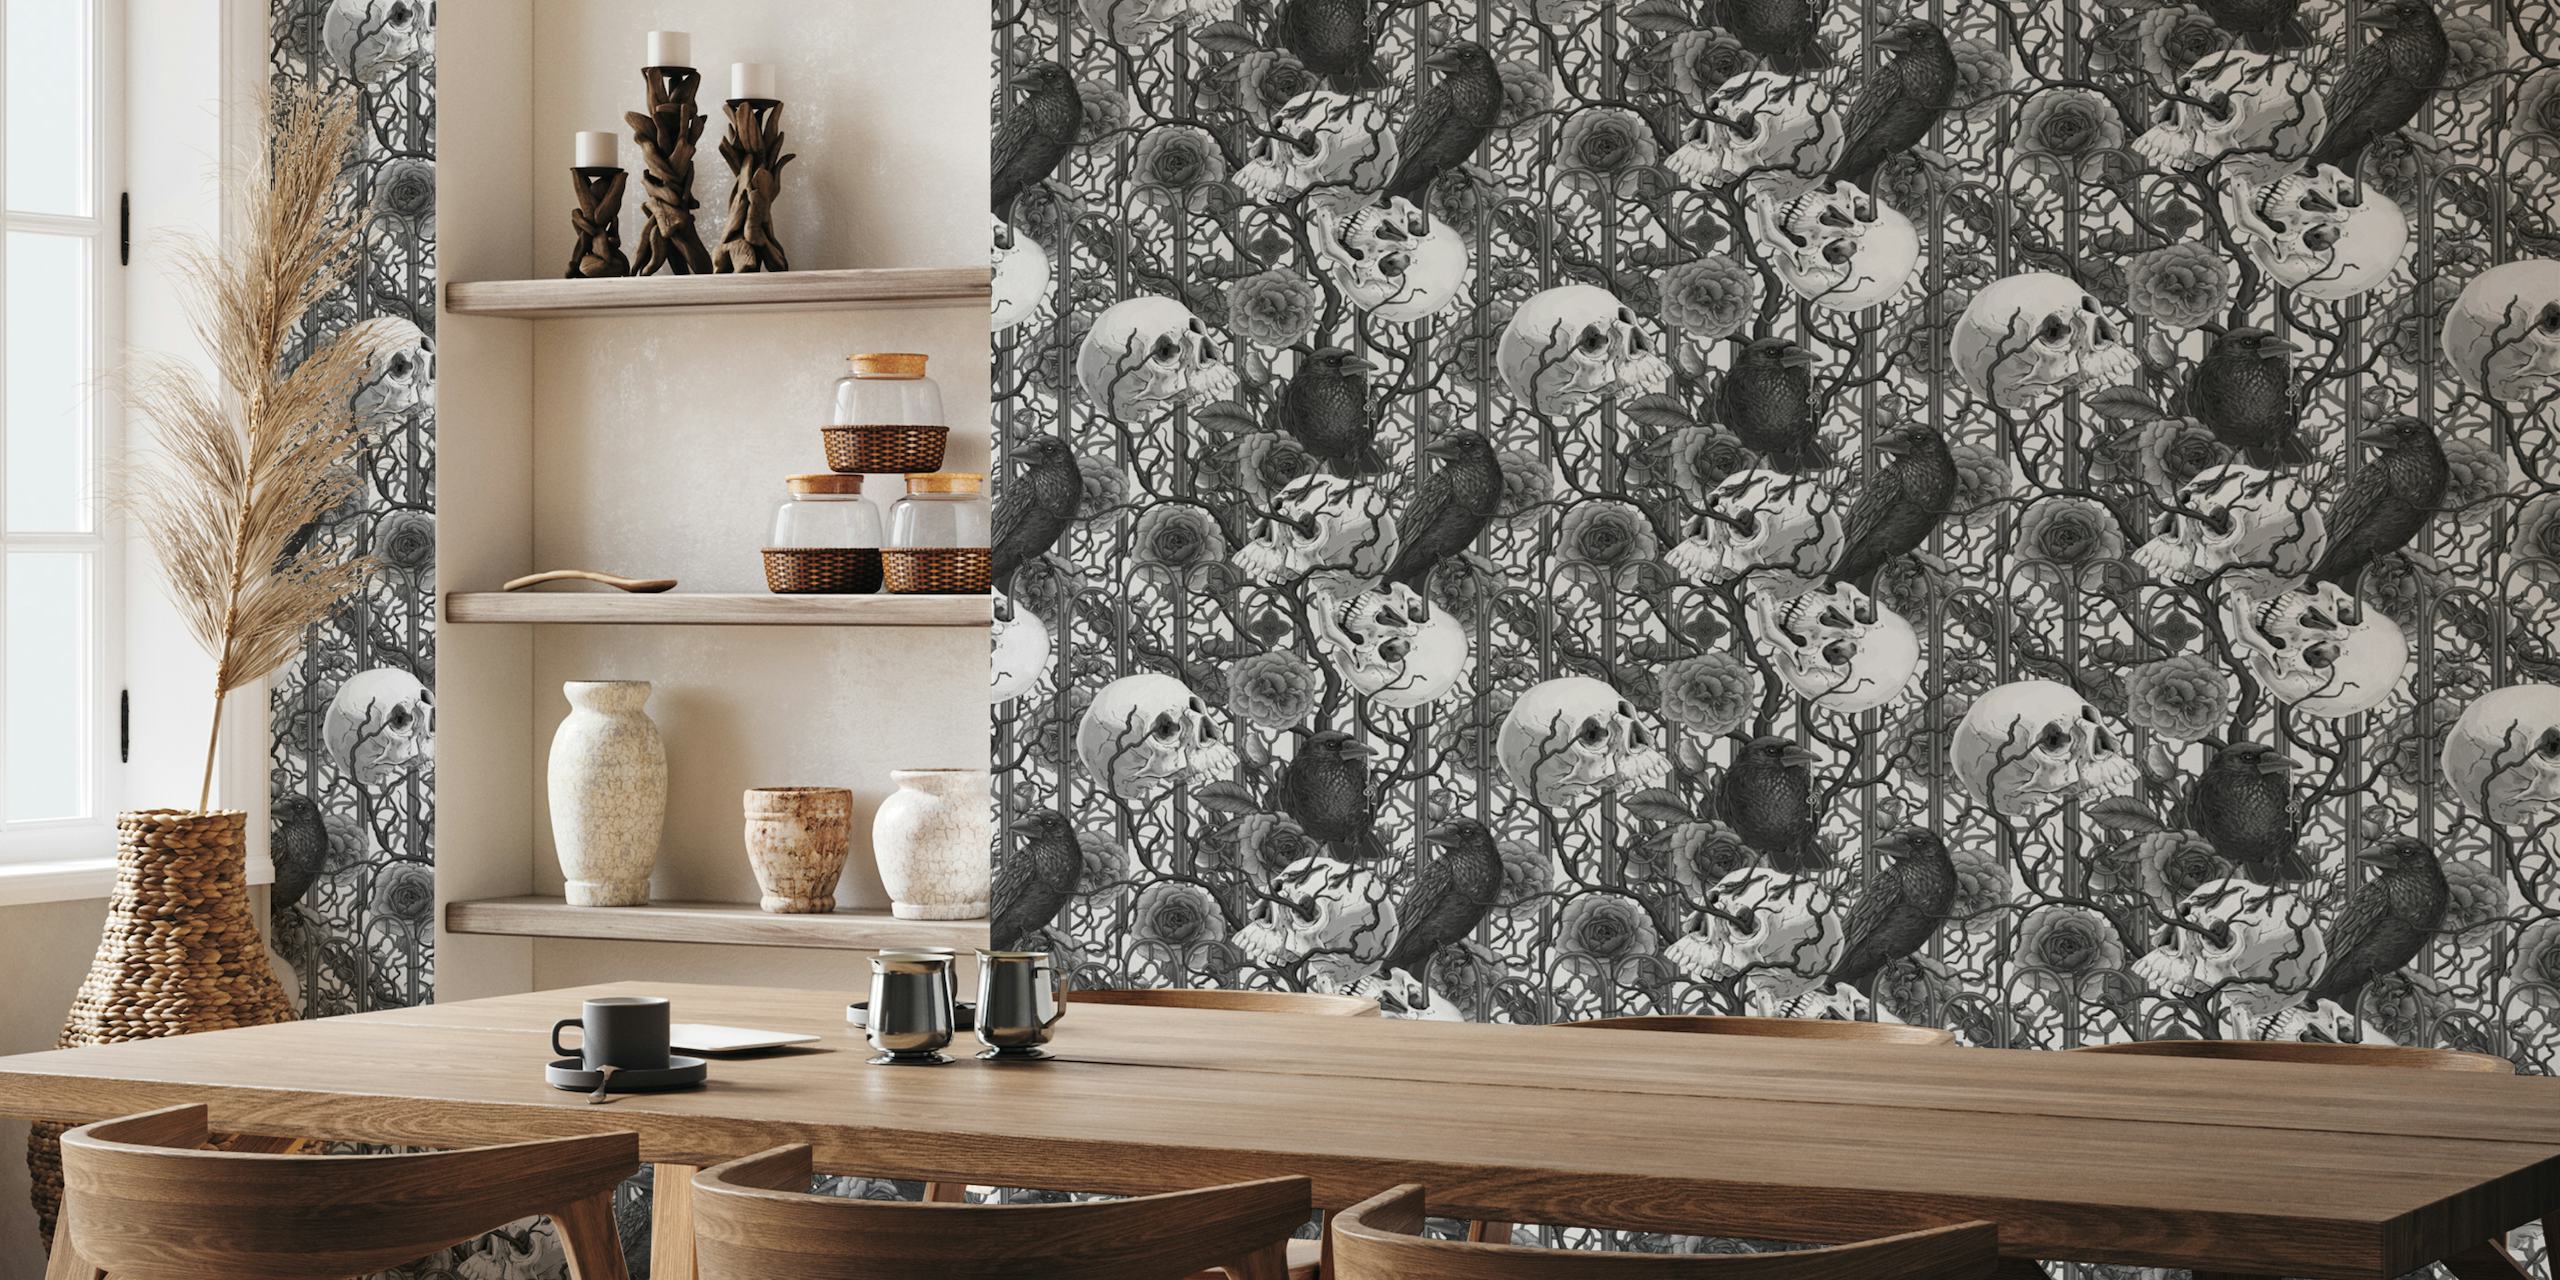 Raven's secret. Dark and moody gothic illustration with human skulls and roses, monocrome on white wallpaper